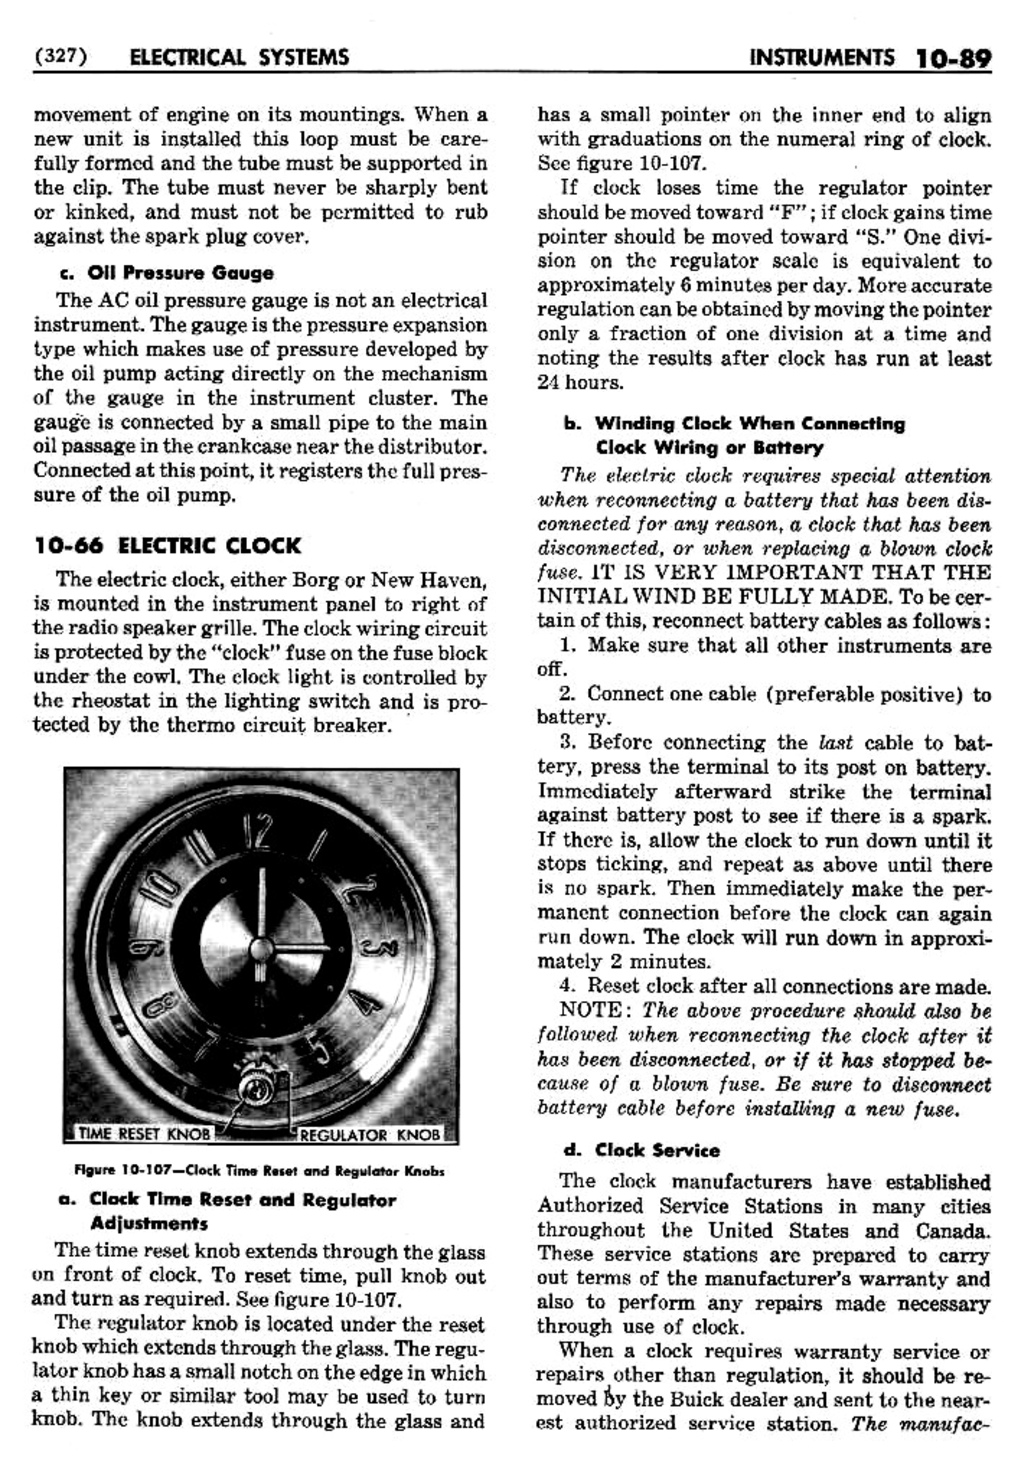 n_11 1950 Buick Shop Manual - Electrical Systems-089-089.jpg